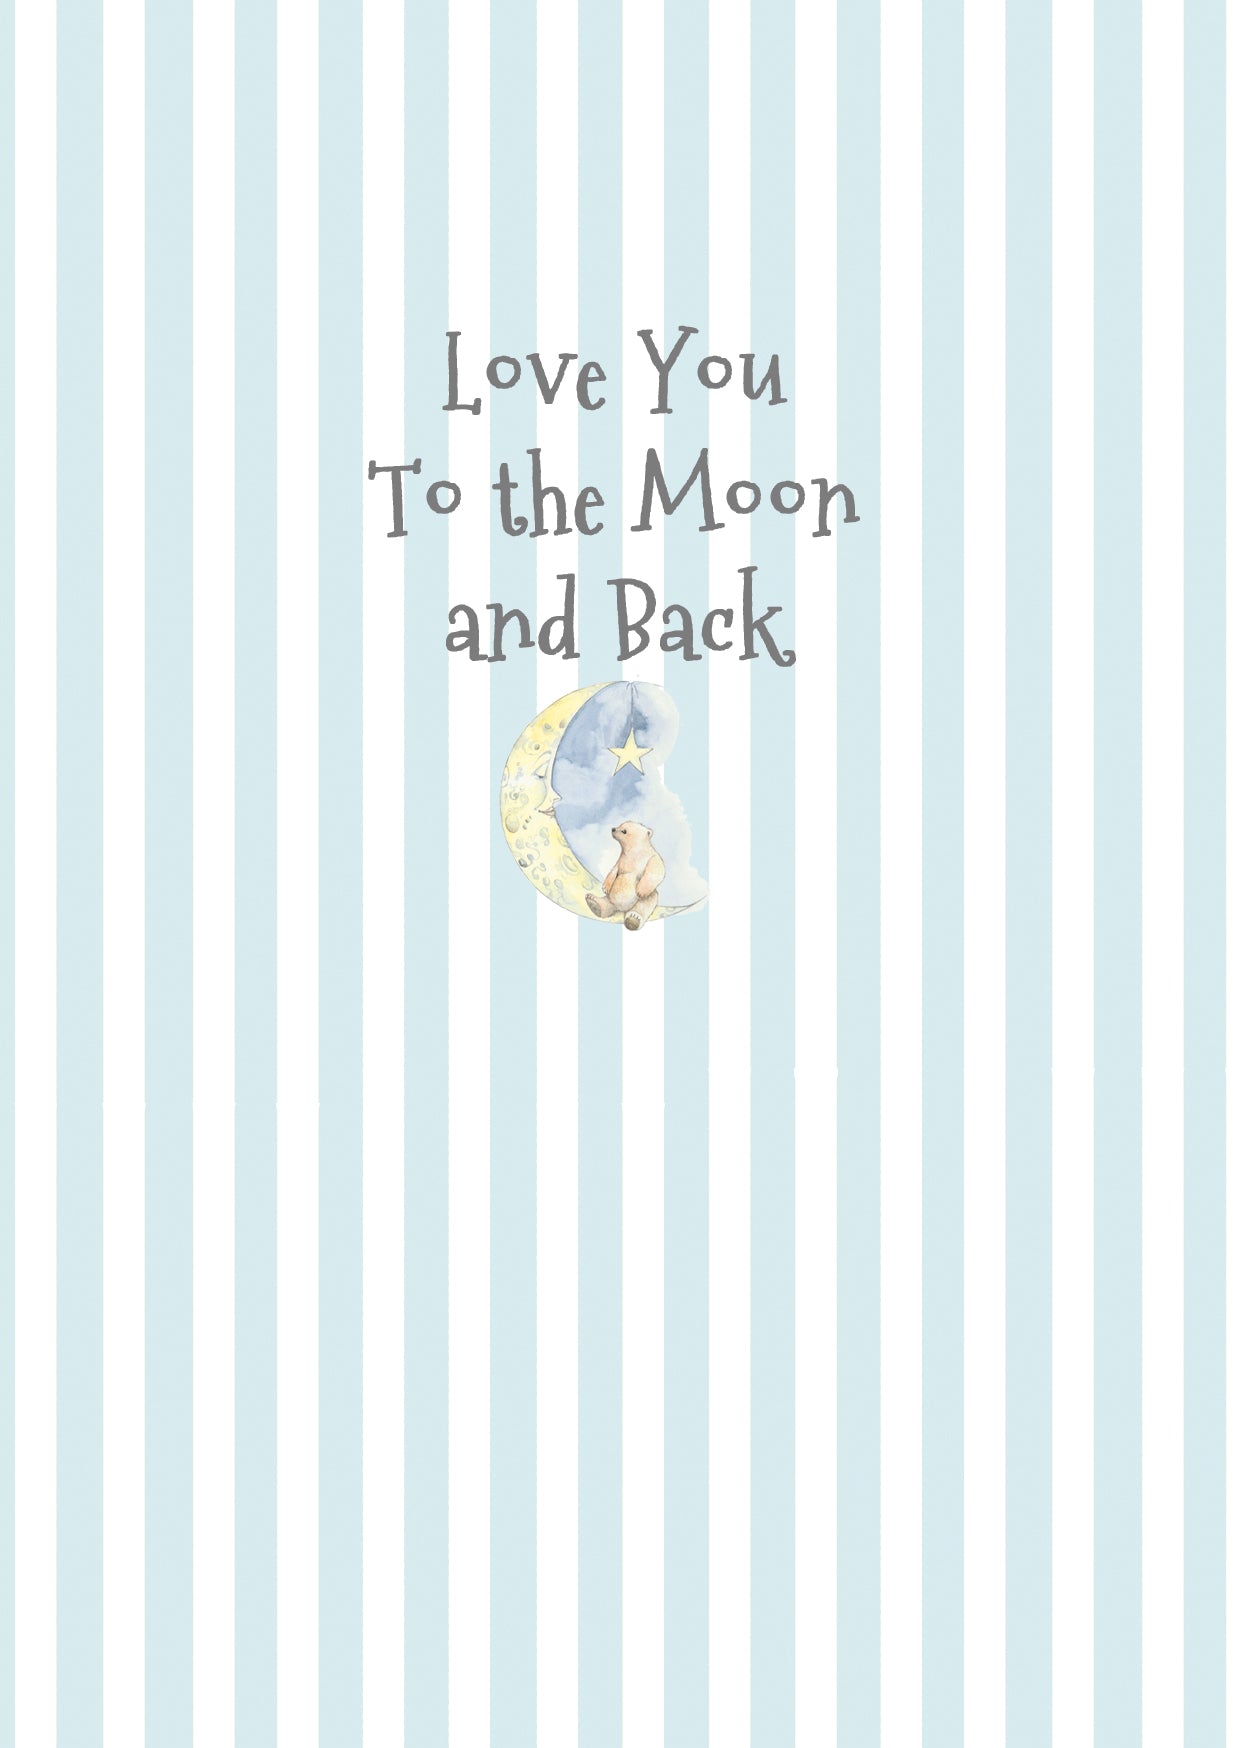 A6 Greeting Card with Ceramic Keepsake - Bear and Moon Greeting & Note Cards Crumble and Core   